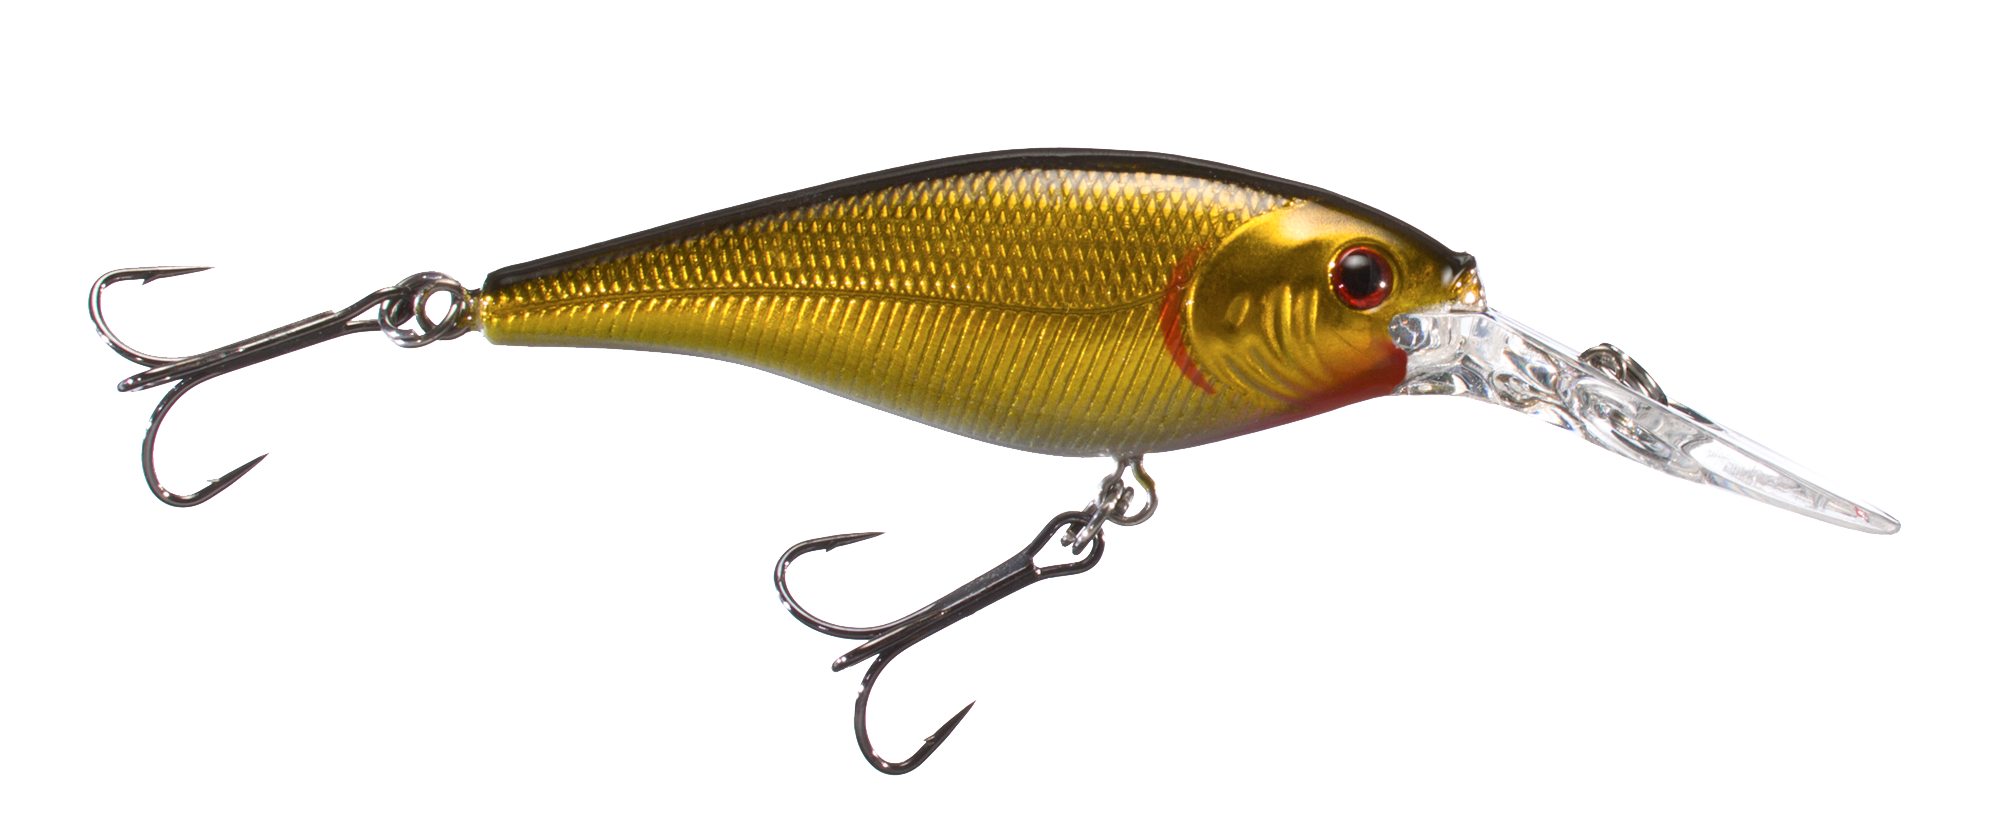  Berkley Flicker Shad Fishing Lure, HD Smelt, 5/16 oz, 2 3/4in   7cm Crankbaits, Size, Profile and Dive Depth Imitates Real Shad, Equipped  with Fusion19 Hook : Sports & Outdoors